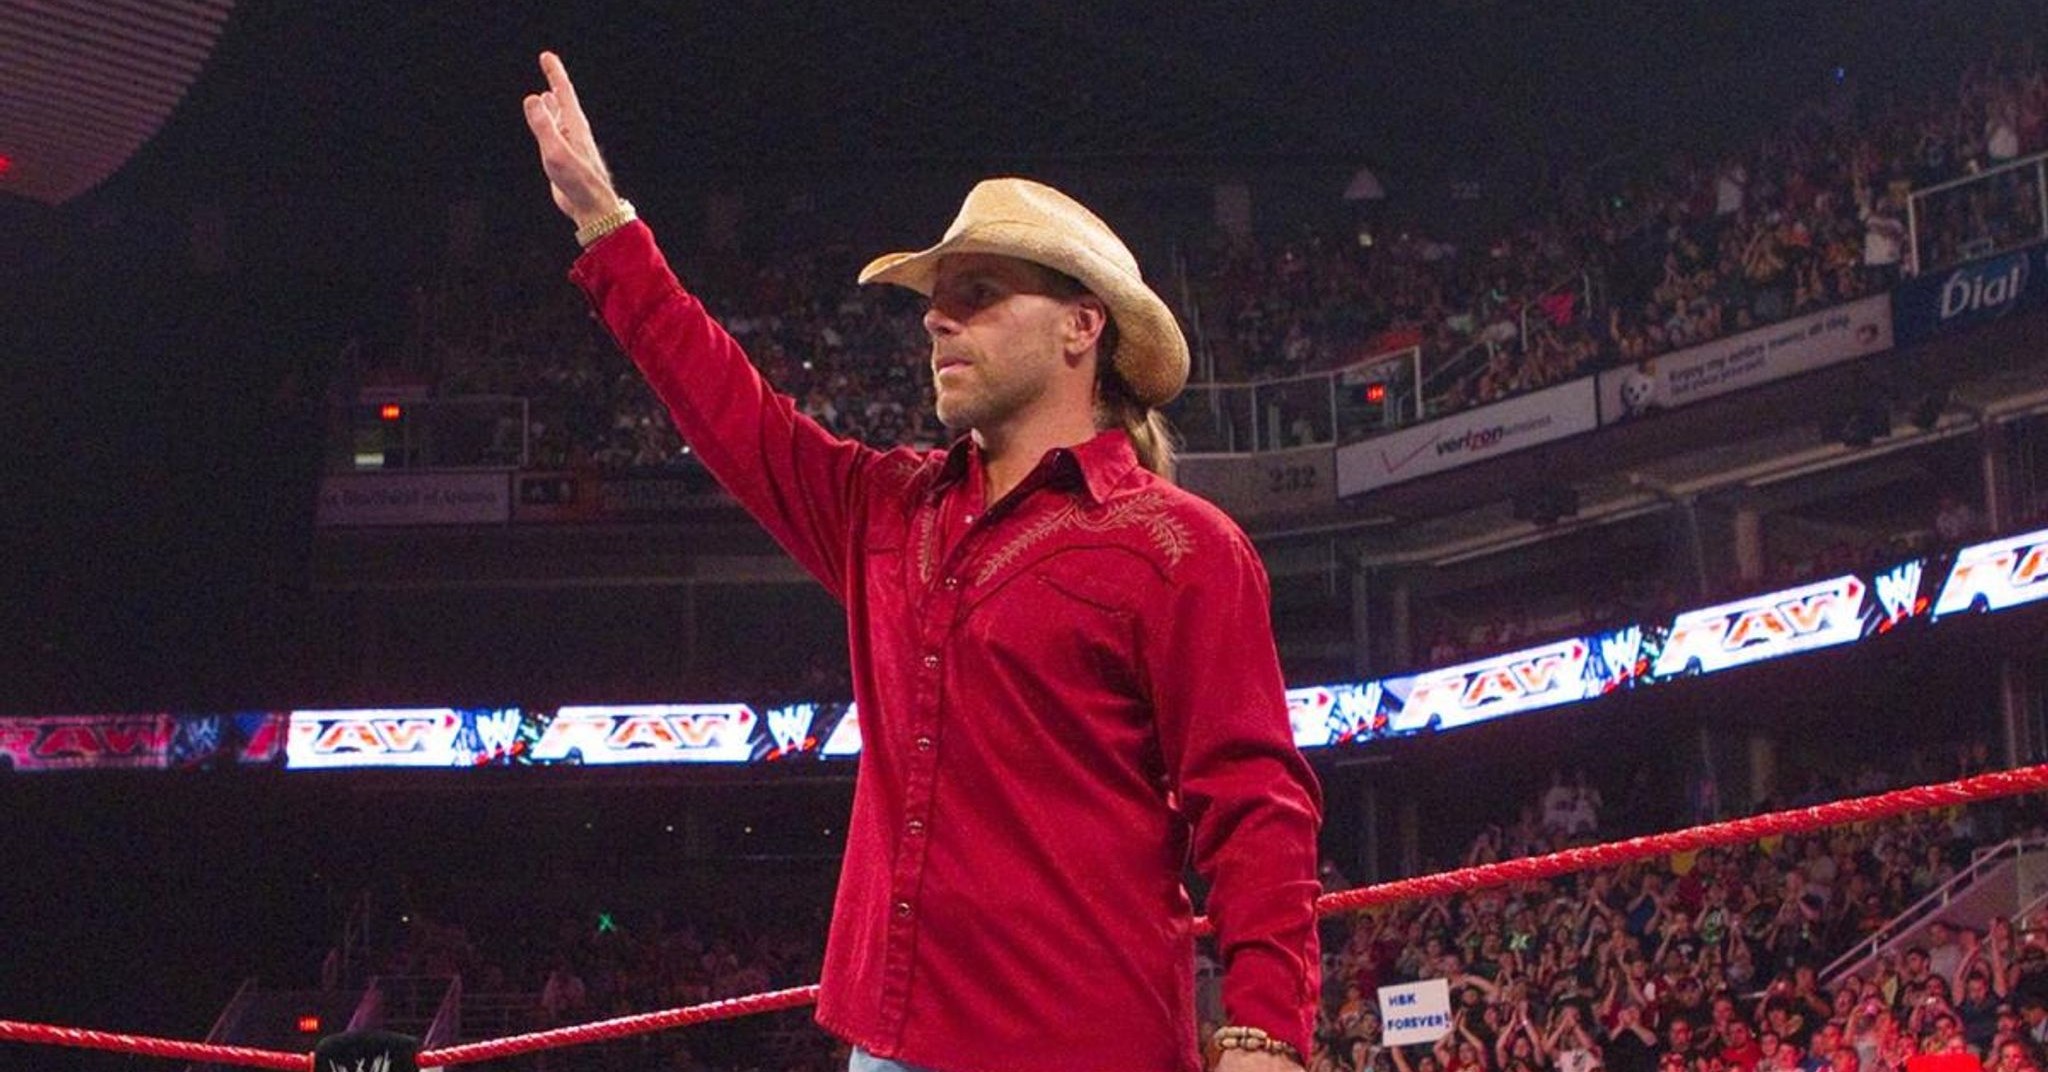 A photo of Shawn Michaels retiring on the WWE Raw After WrestleMania.